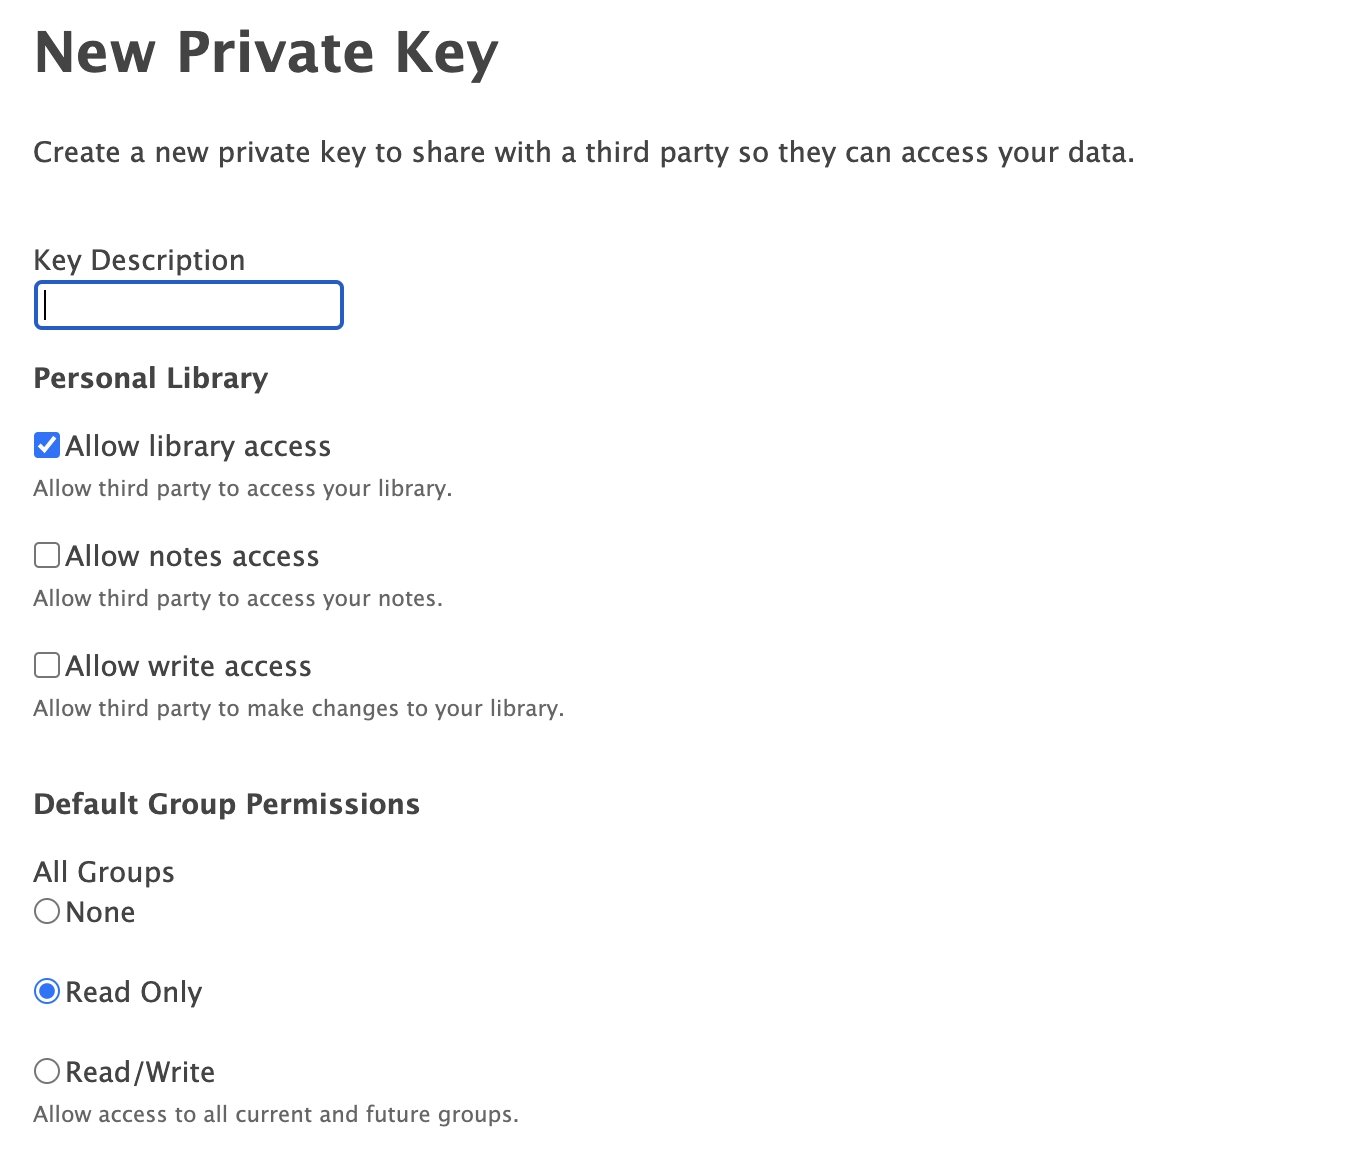 The 'New Private Key' section of Zotero. The 'Allow library access' option is selected.